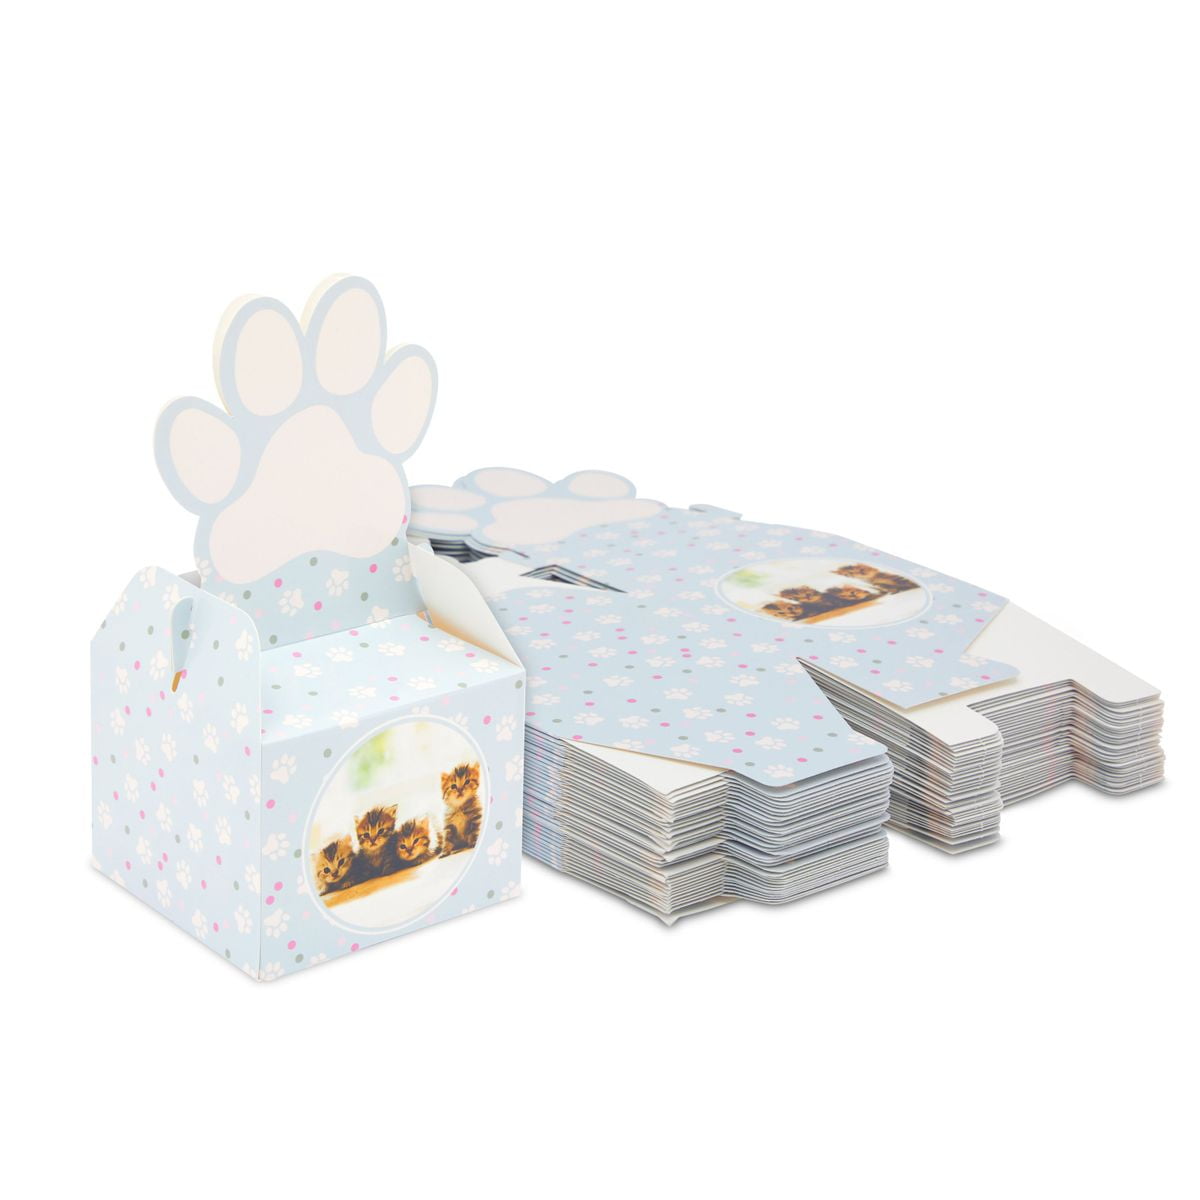 Paw print gable box Luxury hamper party dog puppy gift boxes 